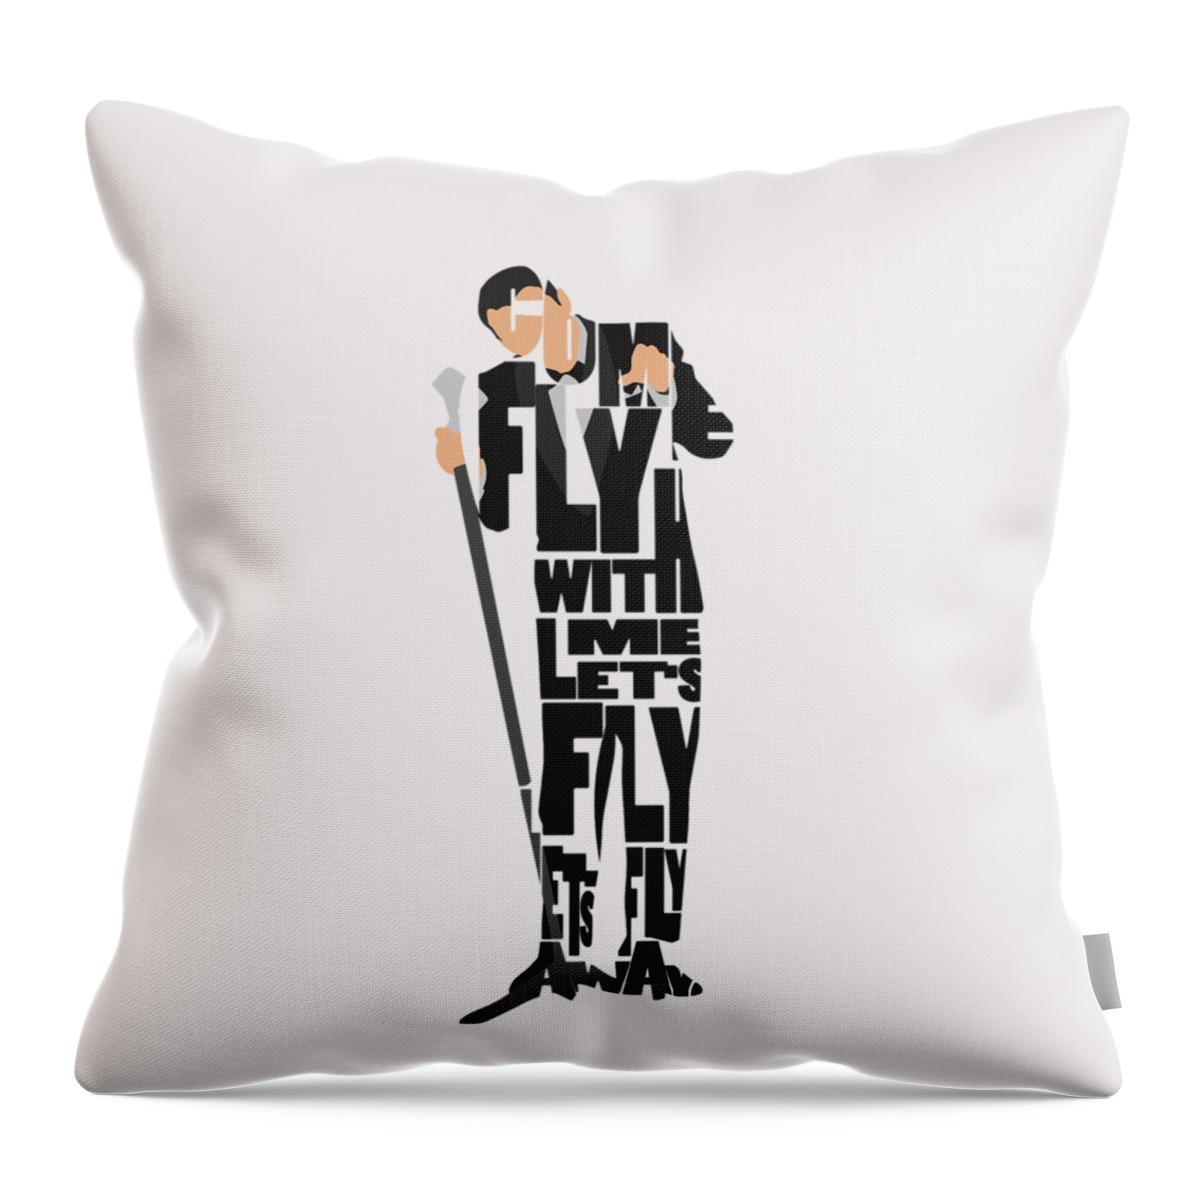 Frank Throw Pillow featuring the painting Frank Sinatra Typography Art by Inspirowl Design